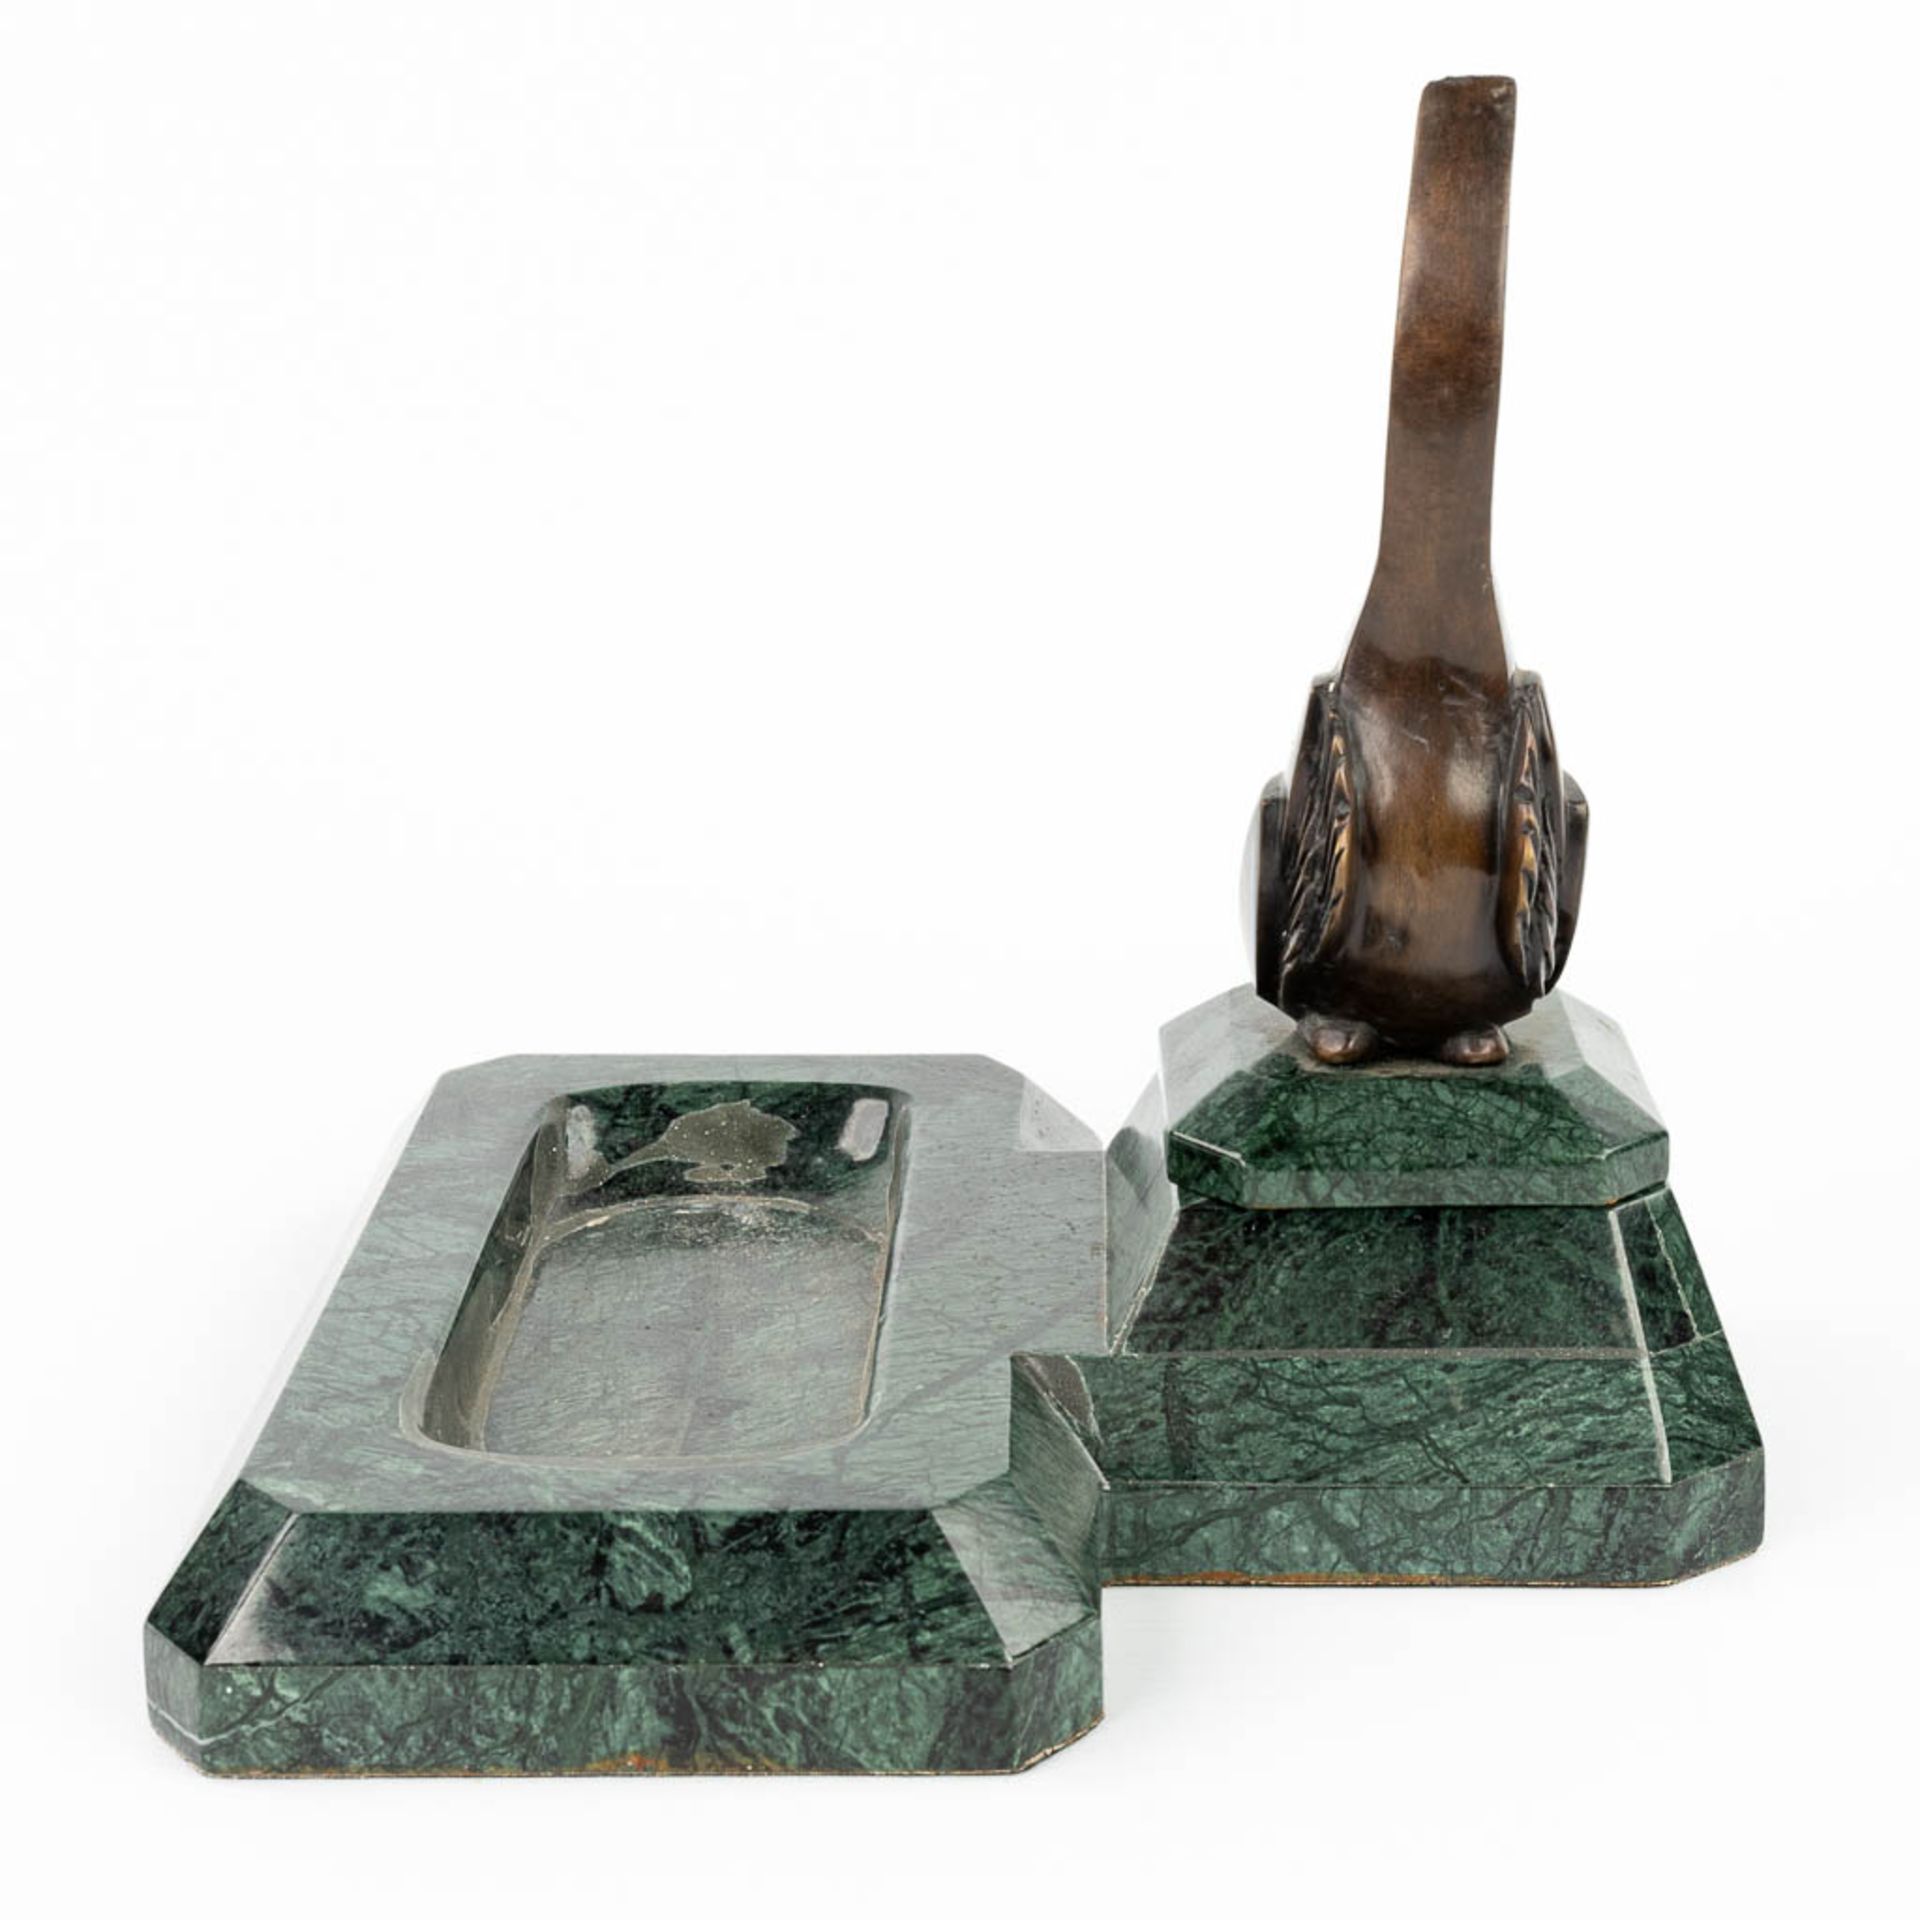 A 'Vide Poche' made of marble with a bird made of bronze in art deco style. - Image 4 of 10